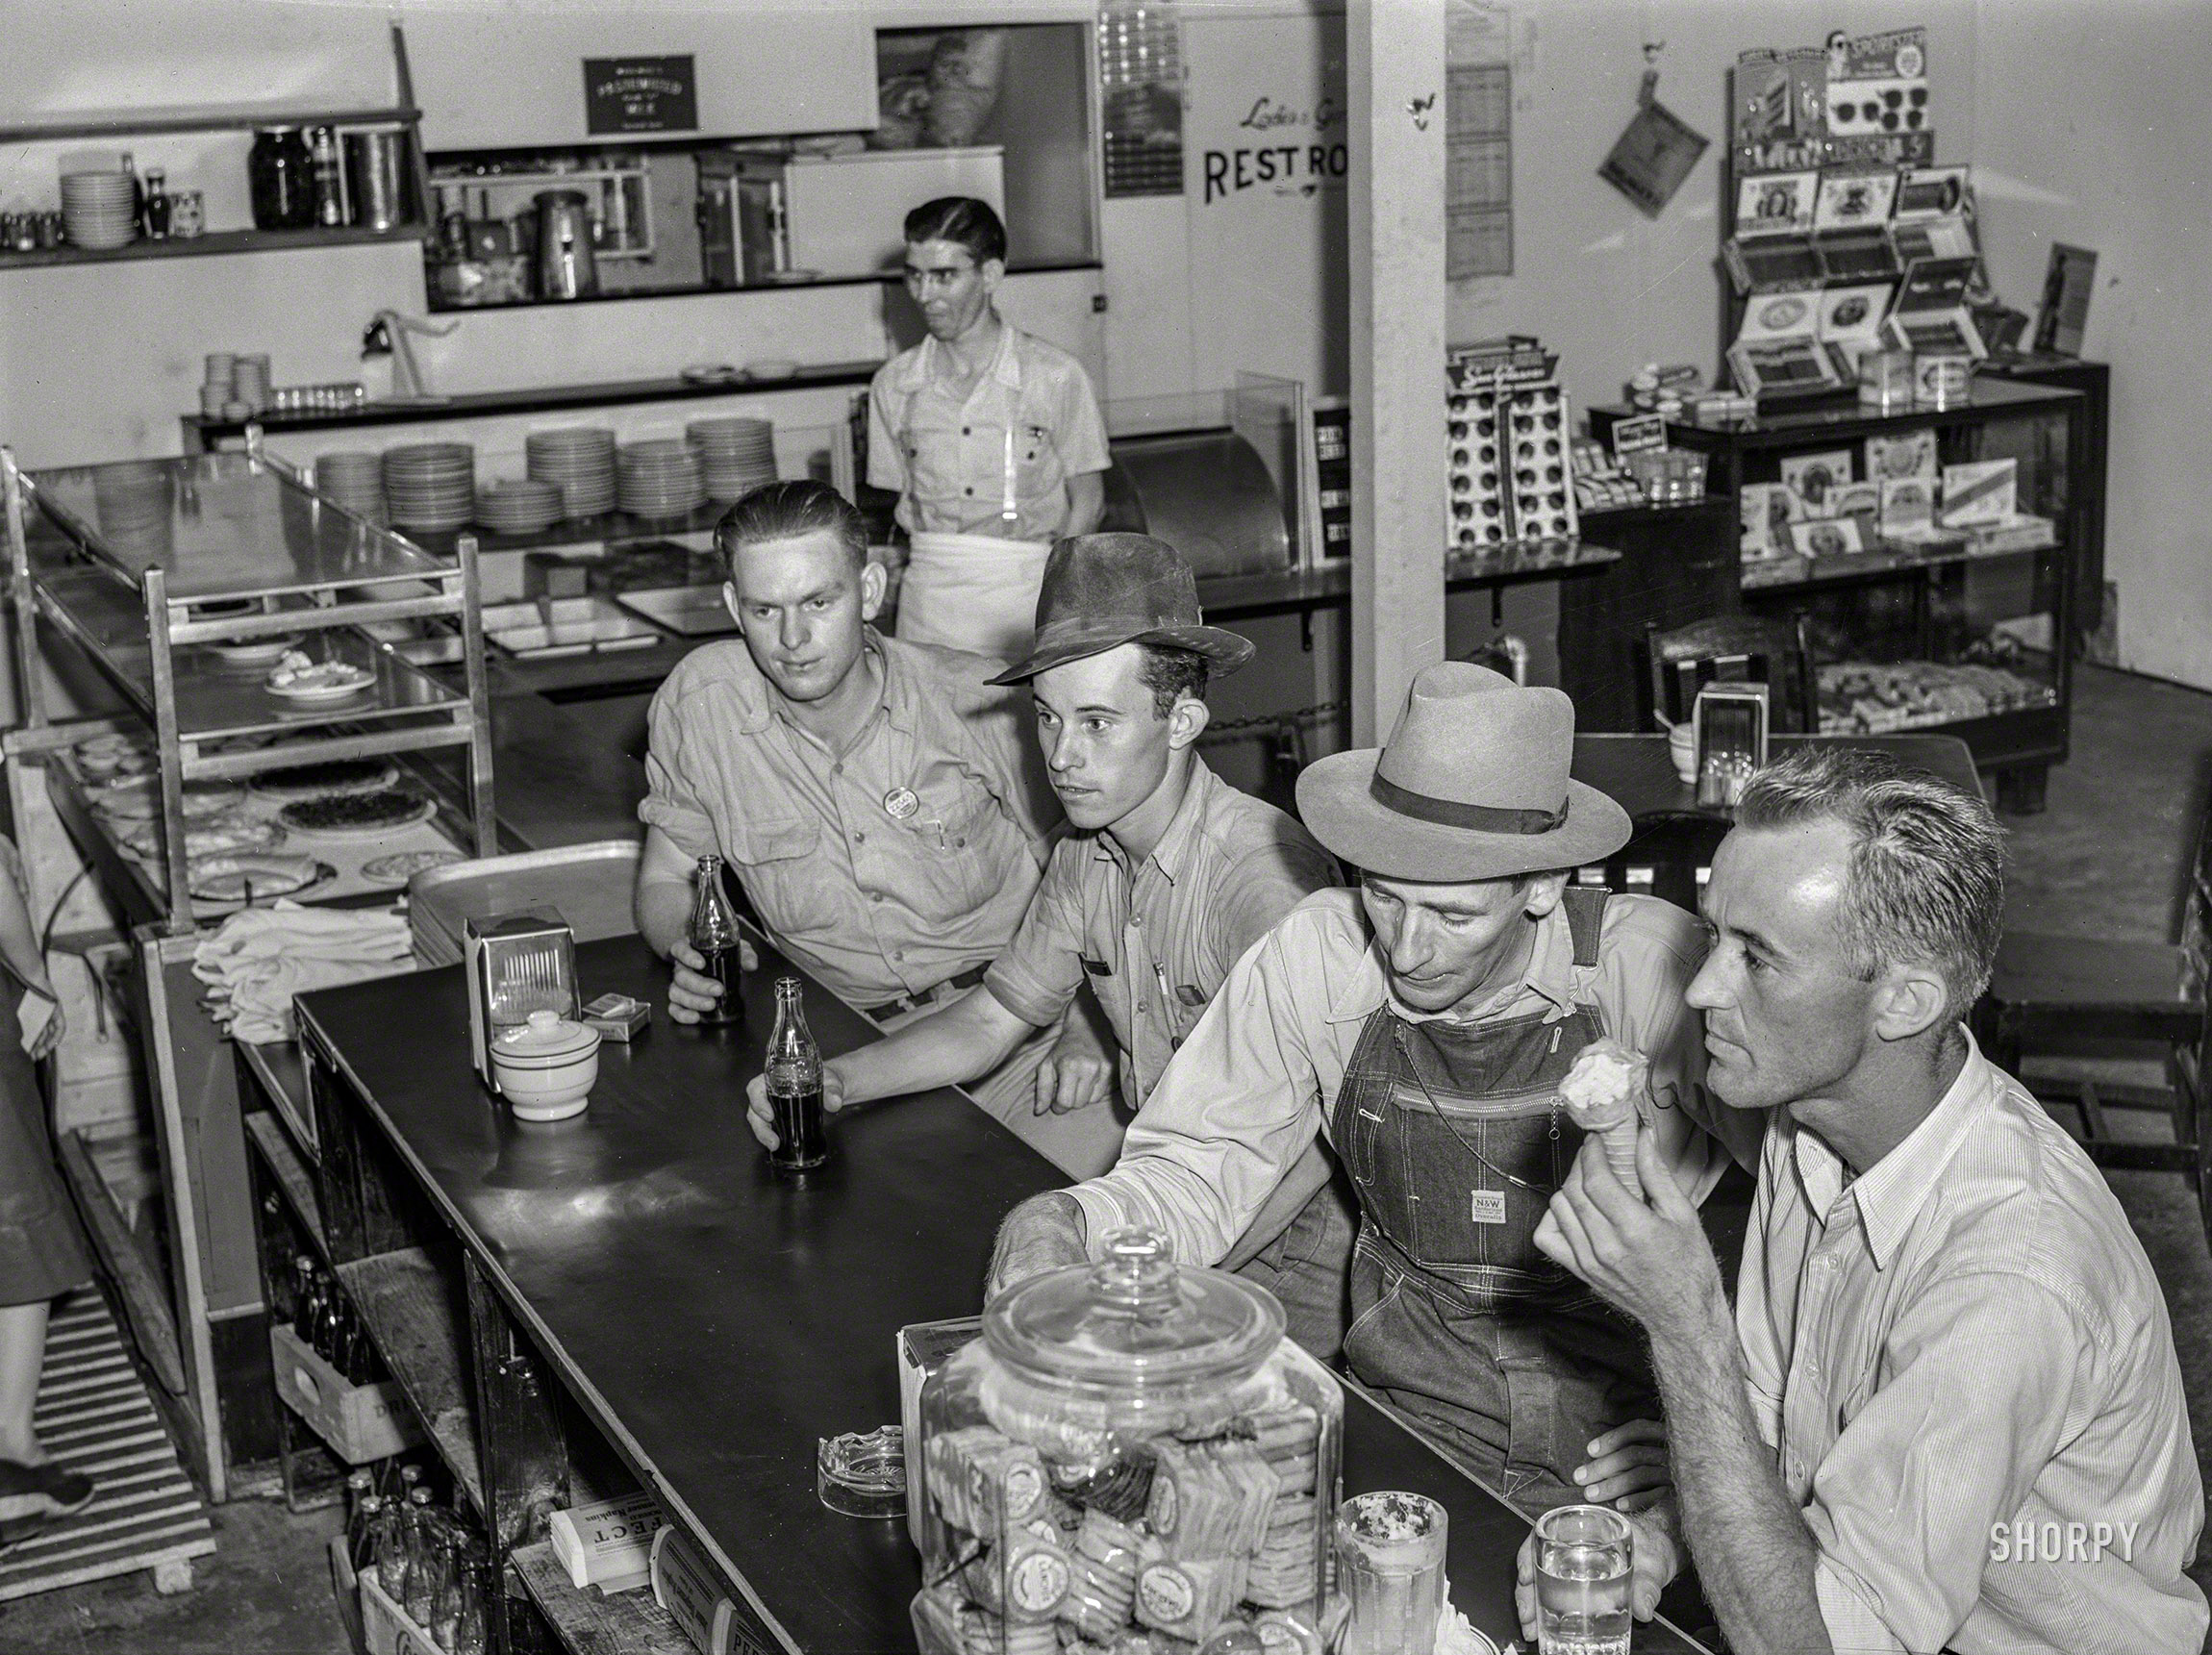 May 1941. "Workmen from the nearby Dupont powder plant in a cafe in Childersburg, Alabama." Acetate negative by Jack Delano. View full size.